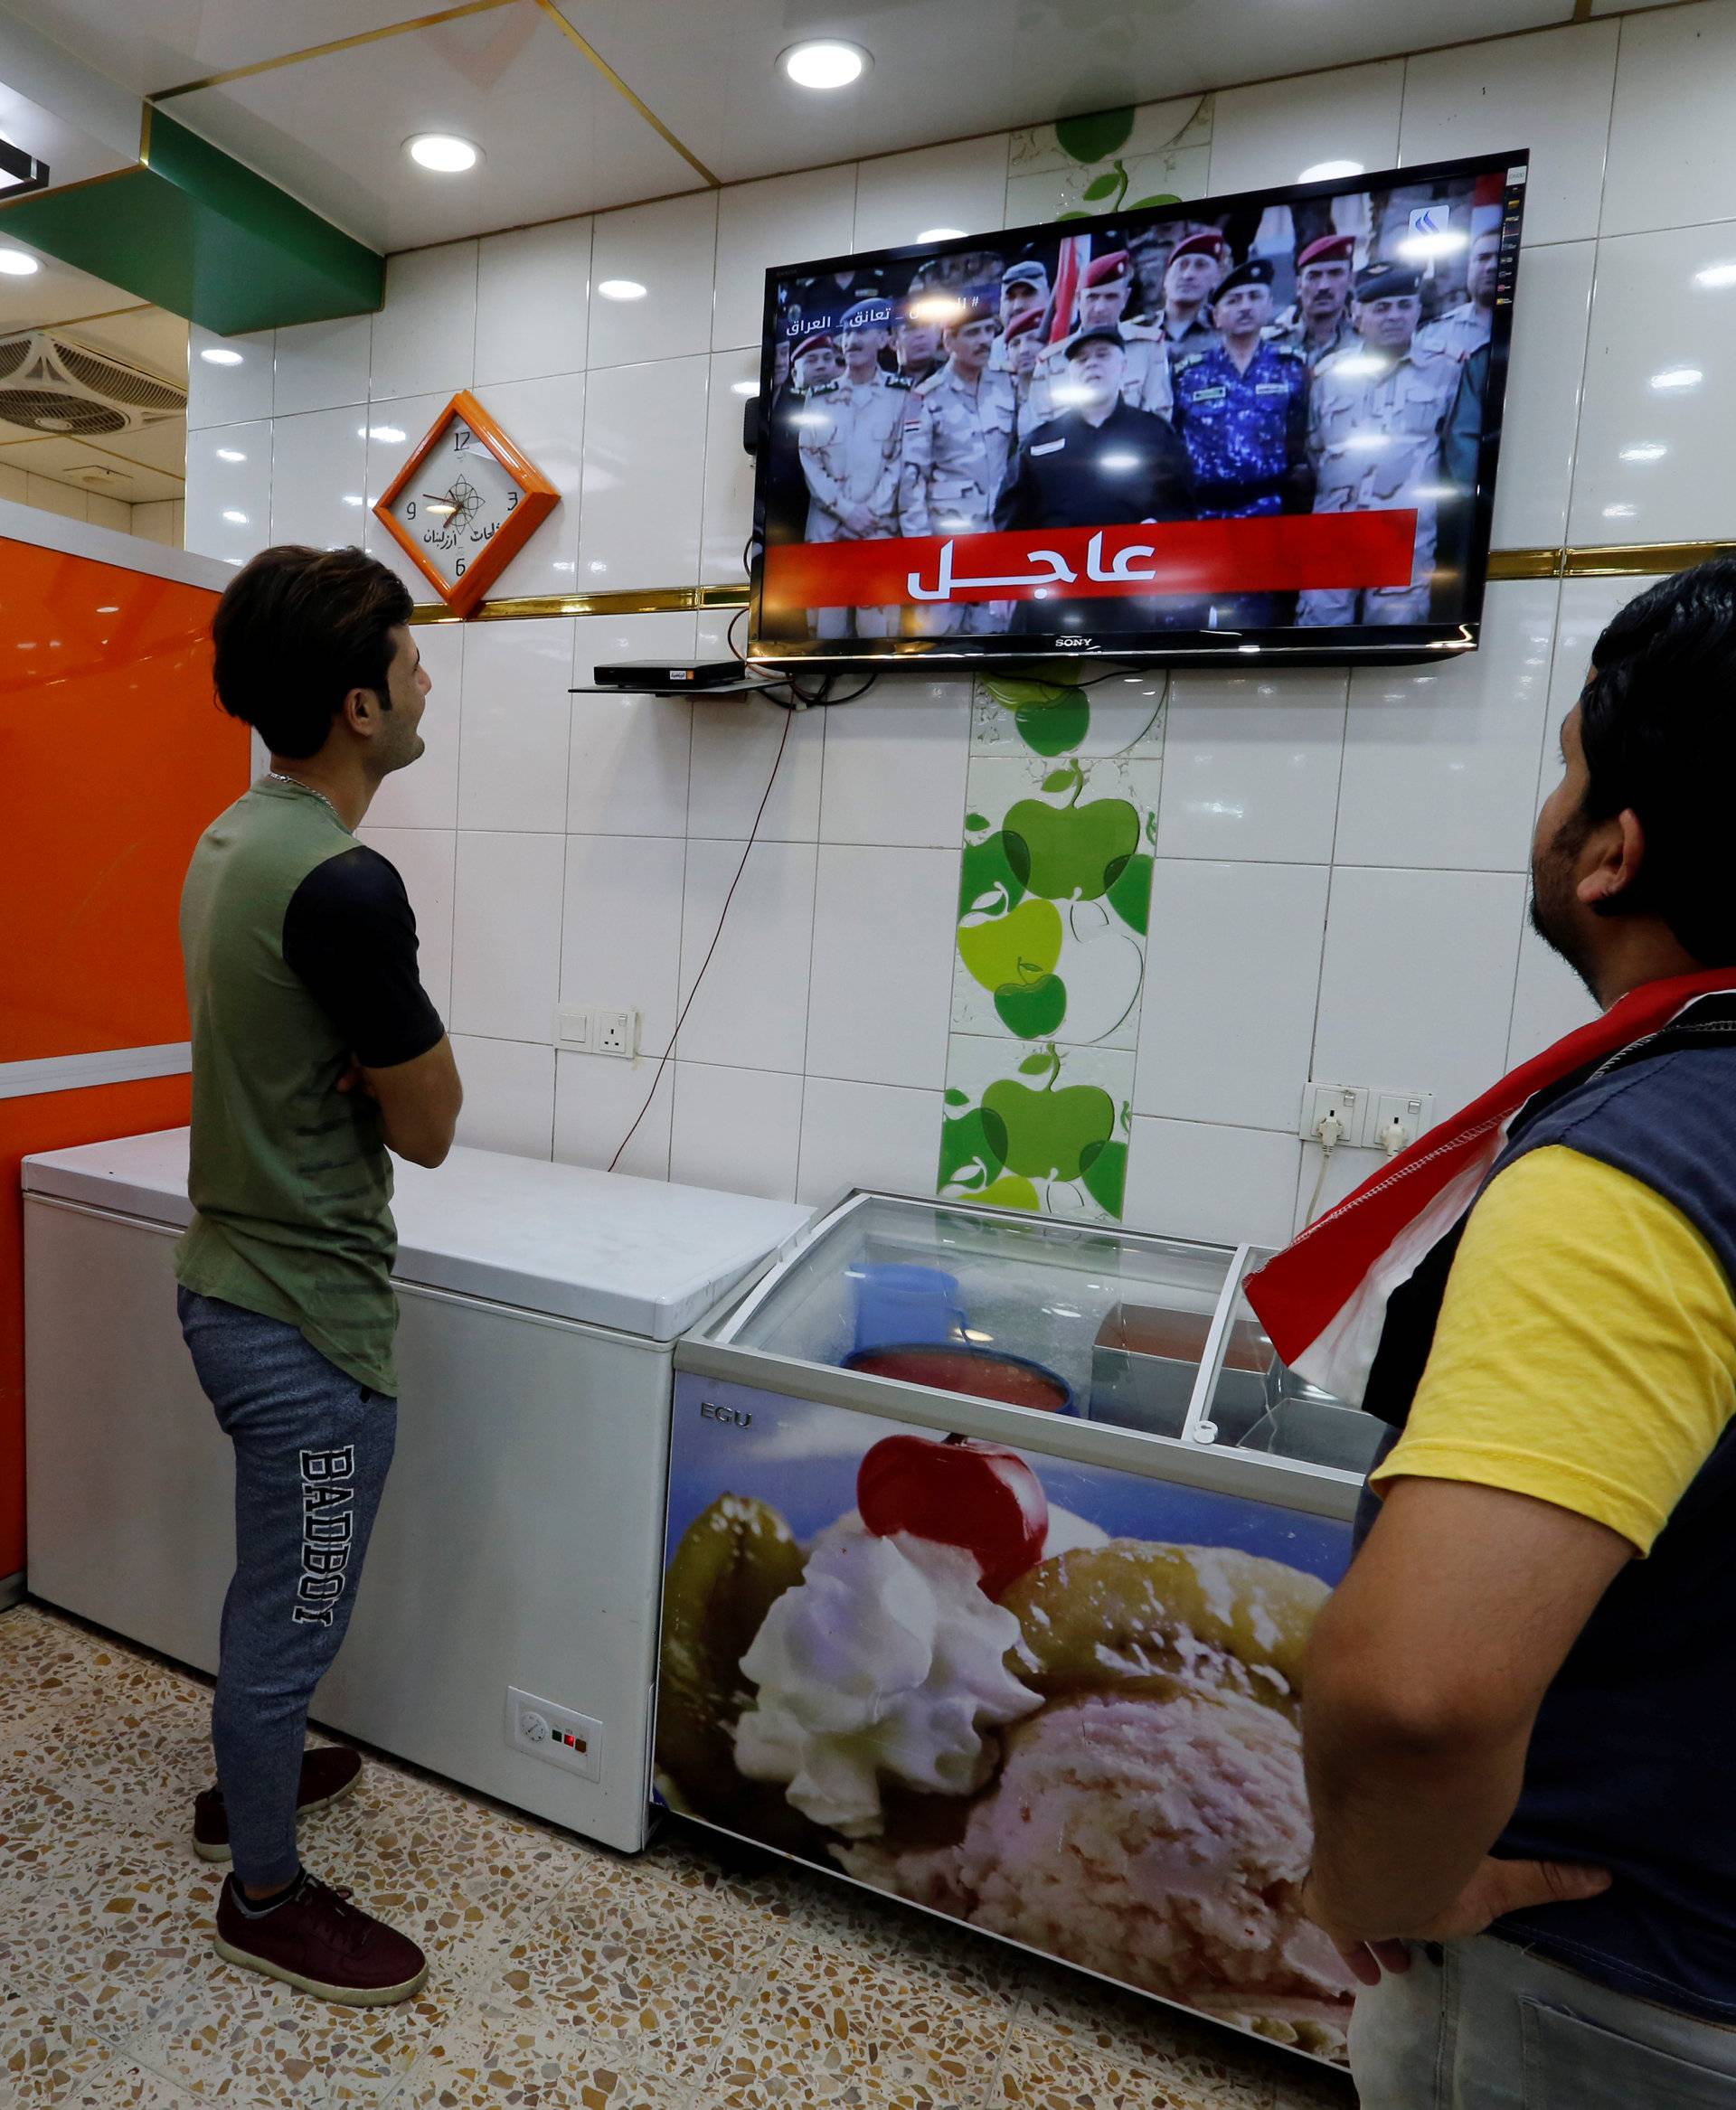 Iraqi men watch on a TV as Iraqi Prime Minister Haider al-Abadi announces victory over Islamic State, in Baghdad